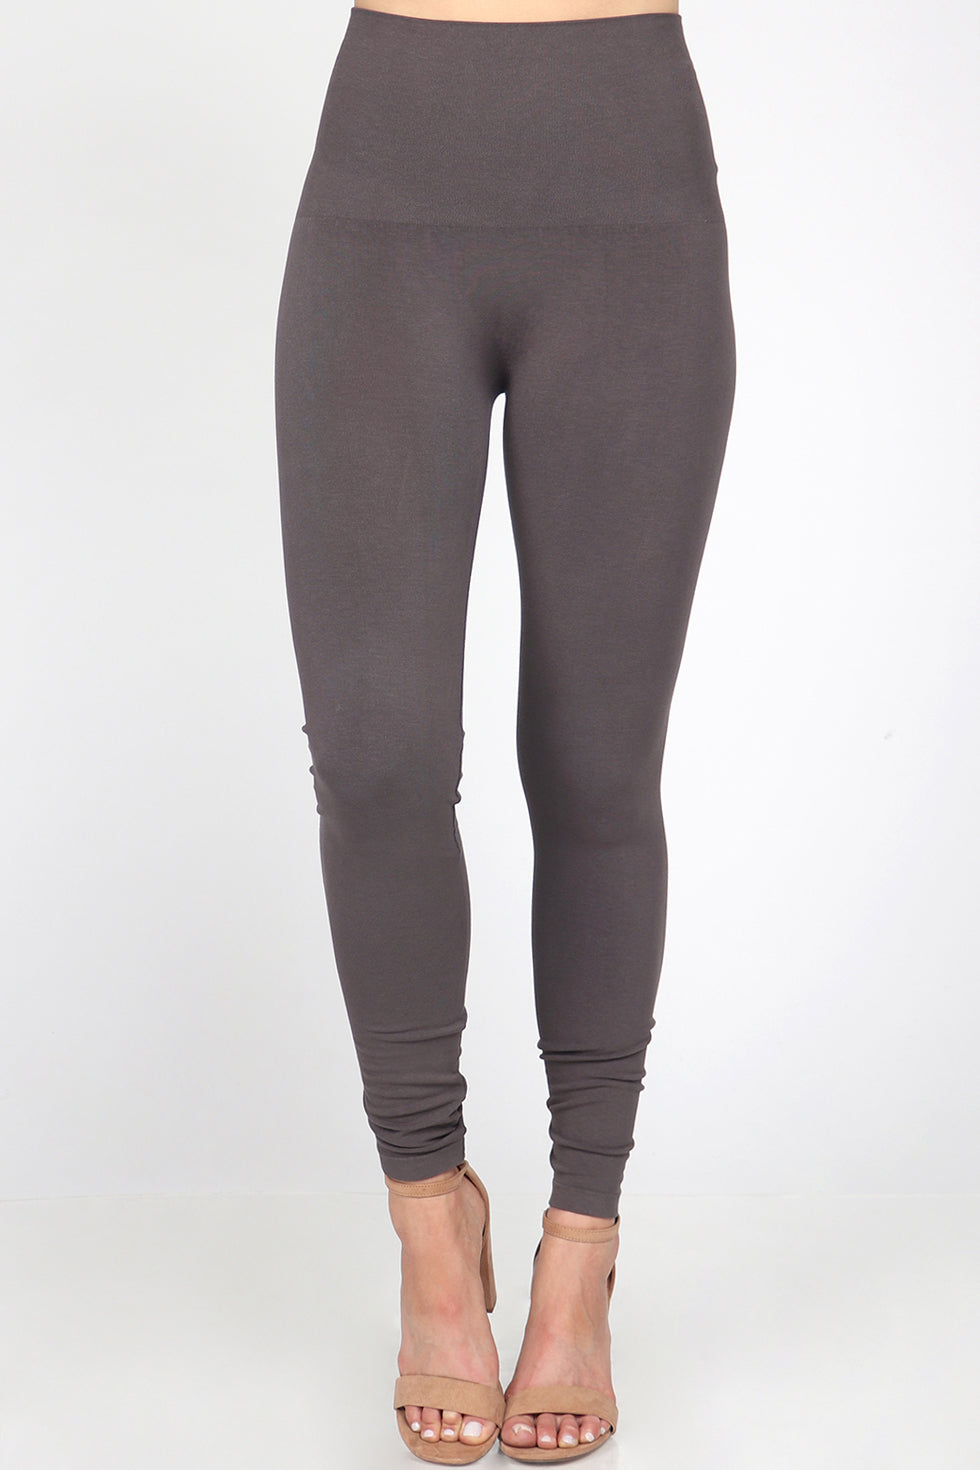 OQQ leggings Gray - $15 (40% Off Retail) - From brianne